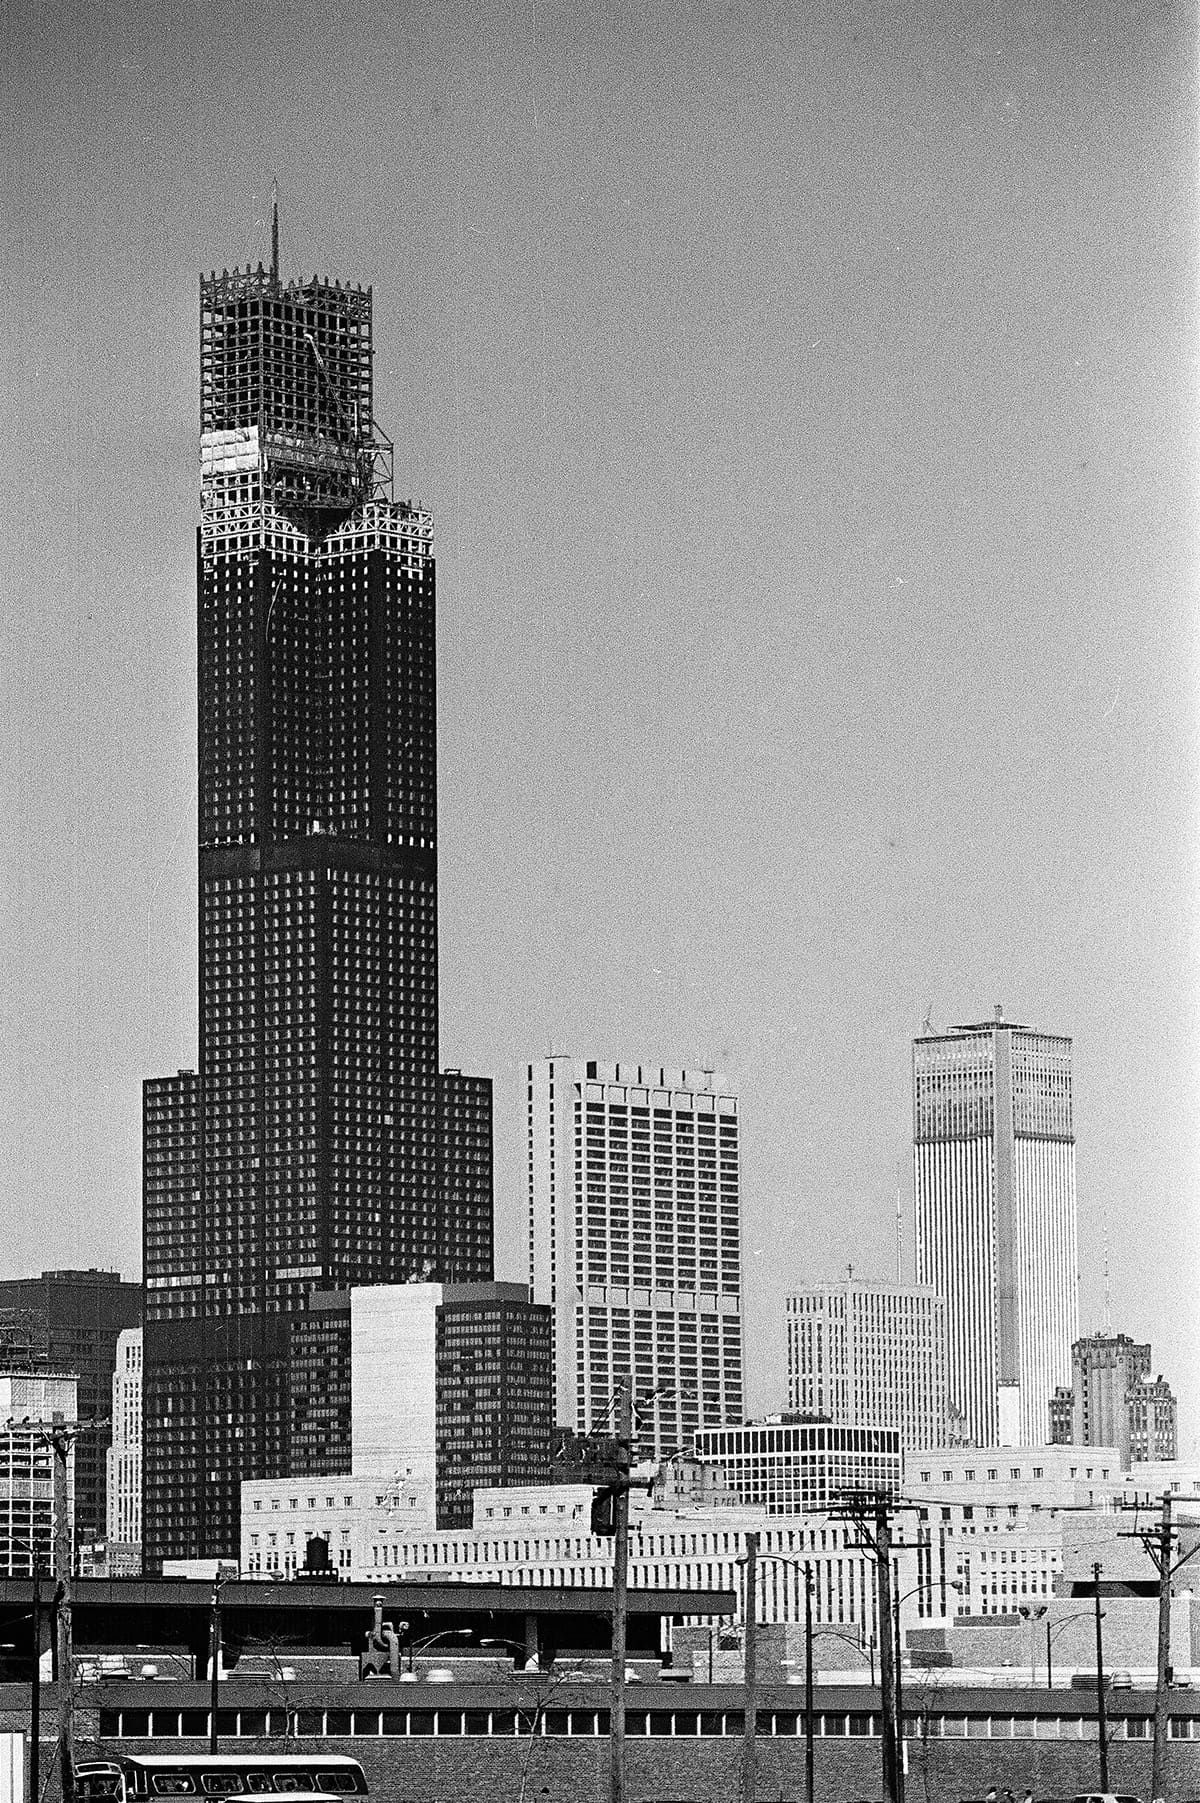 Historical photo of the Sears Tower under construction